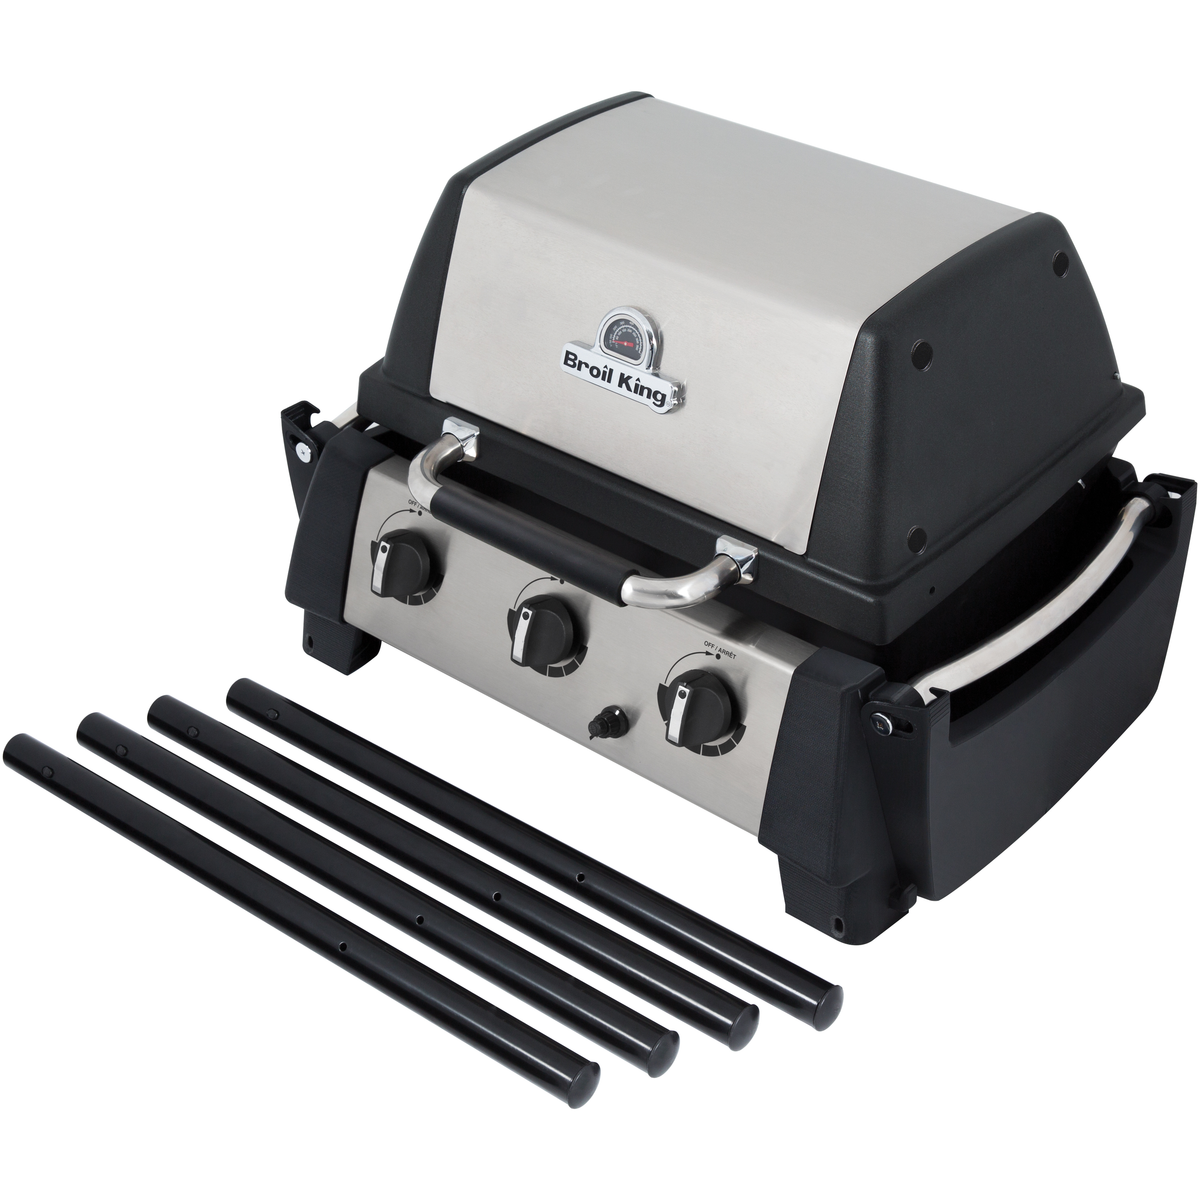 Broil King Porta-Chef 320 – Luxe Barbeque Company